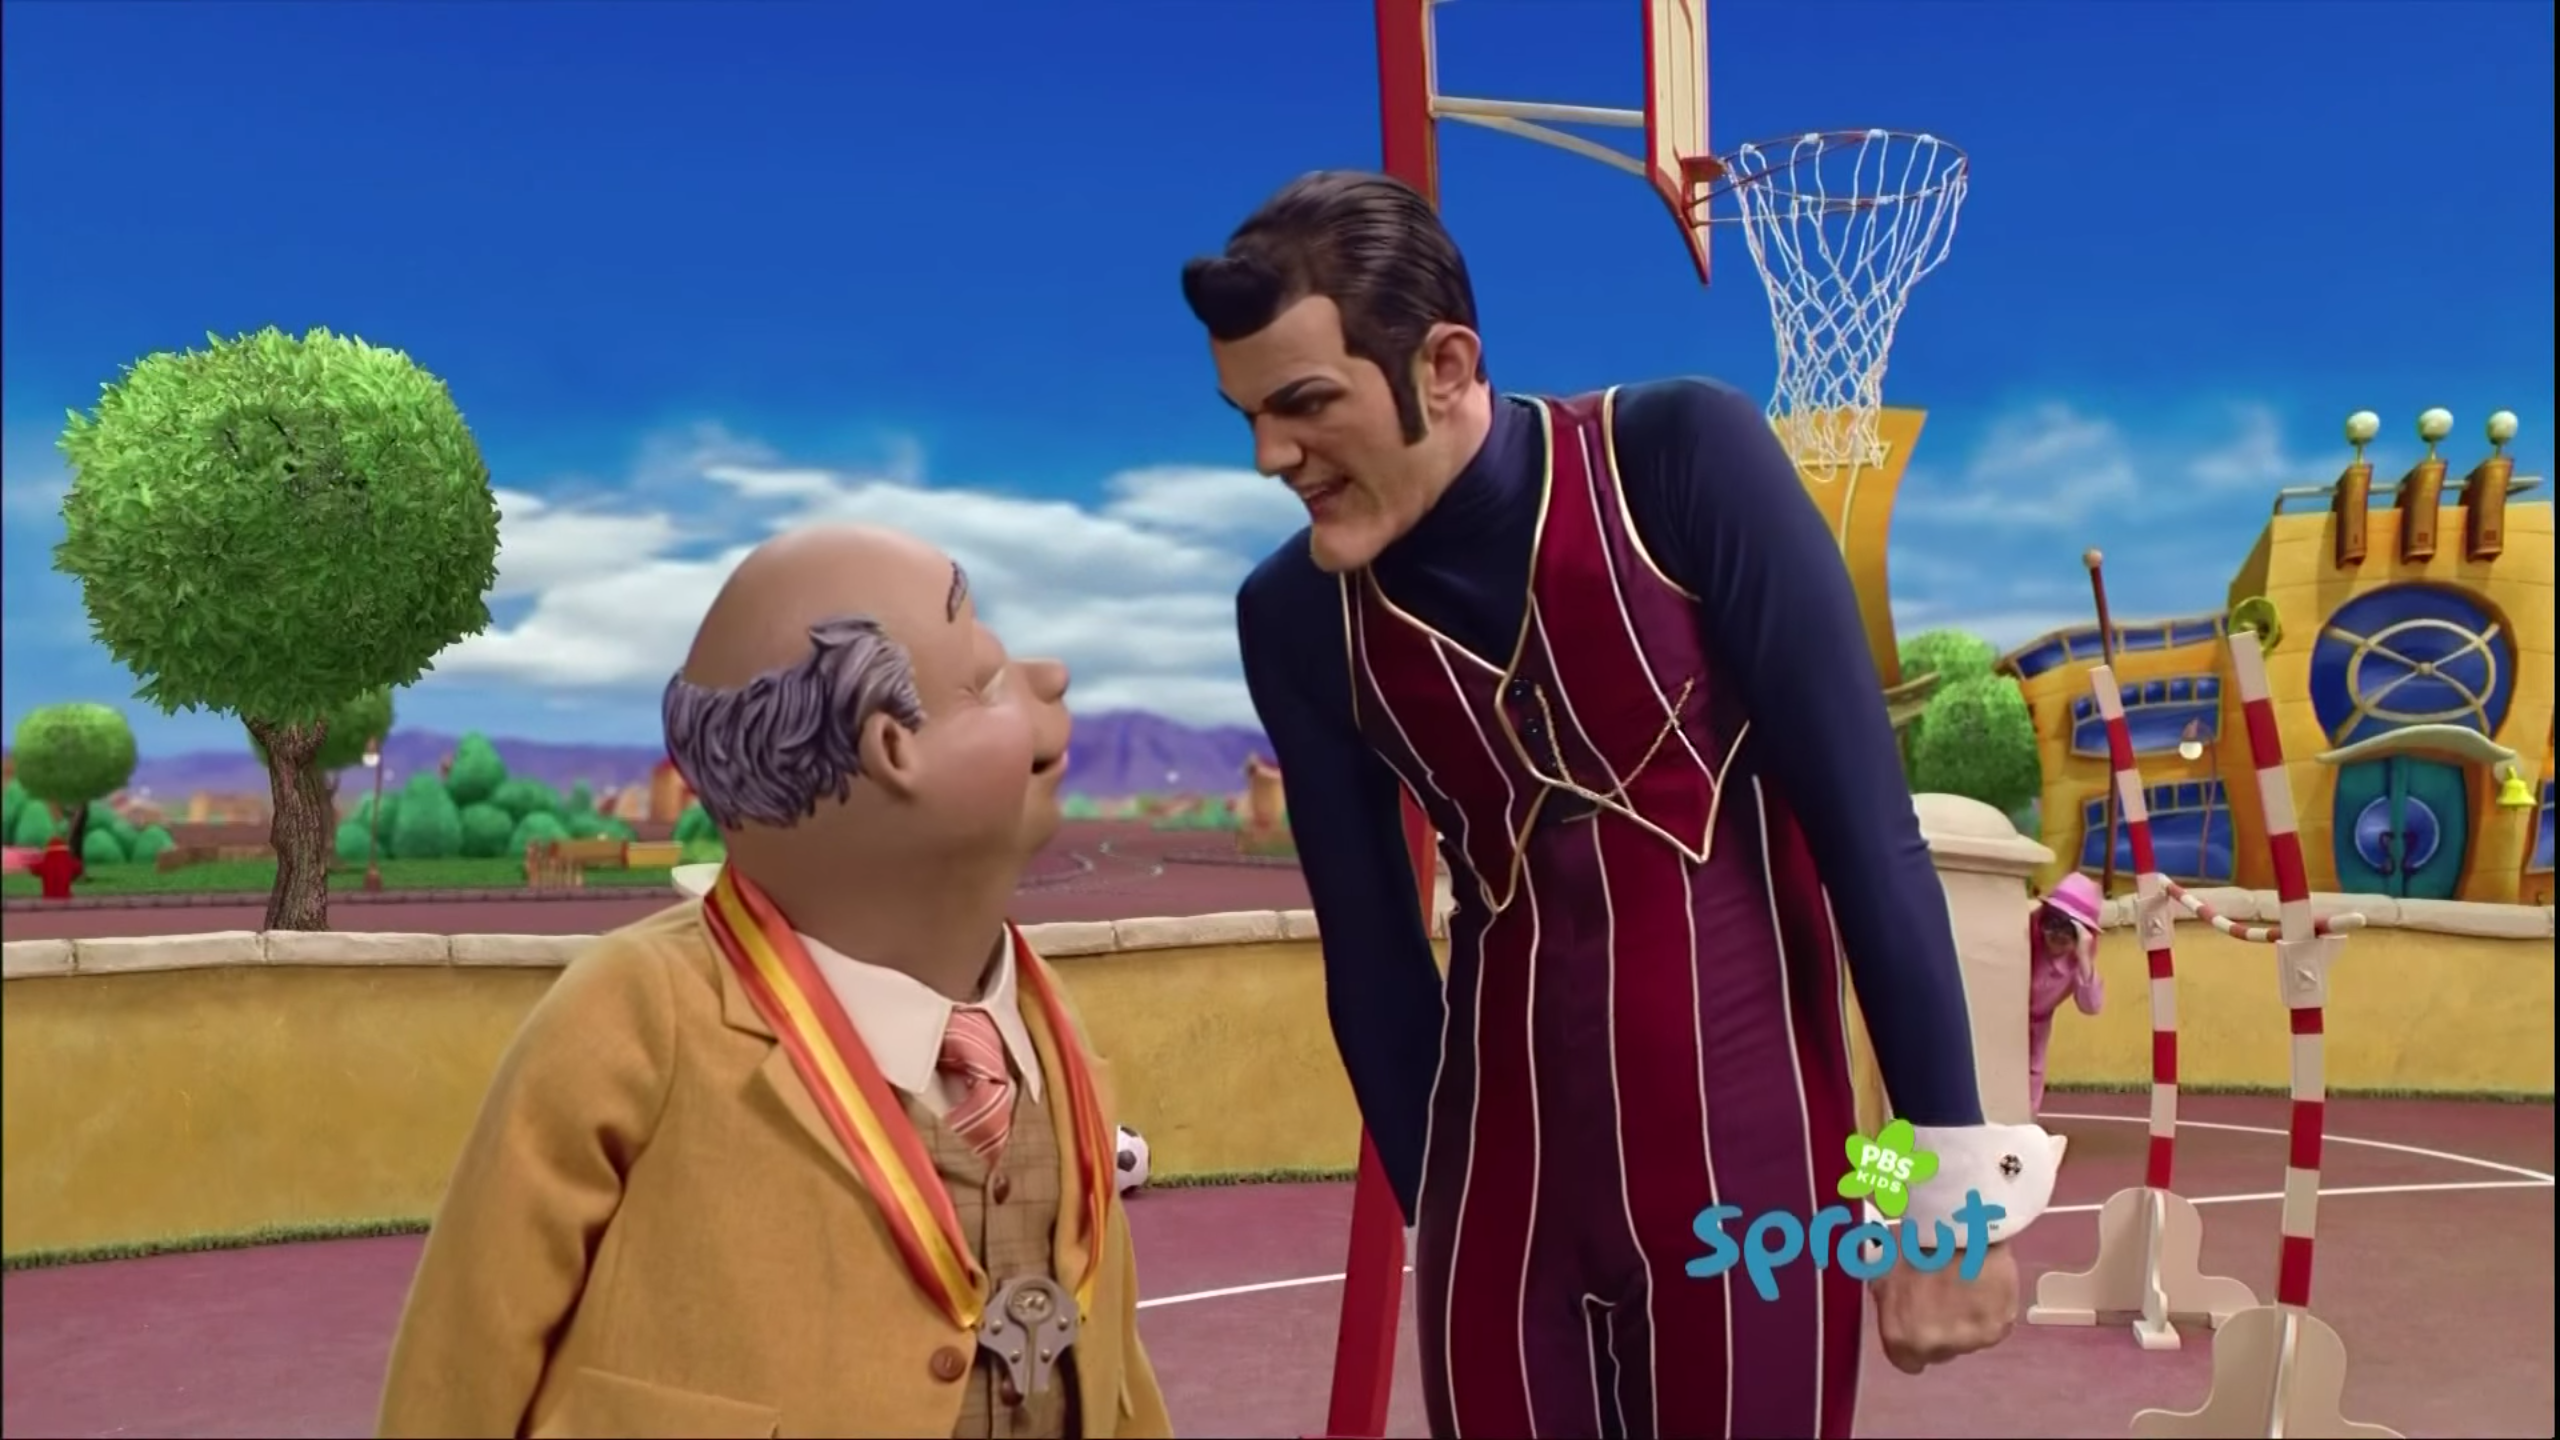 Lazytown Photo: Robbie Rotten and Mayor Meanswell.